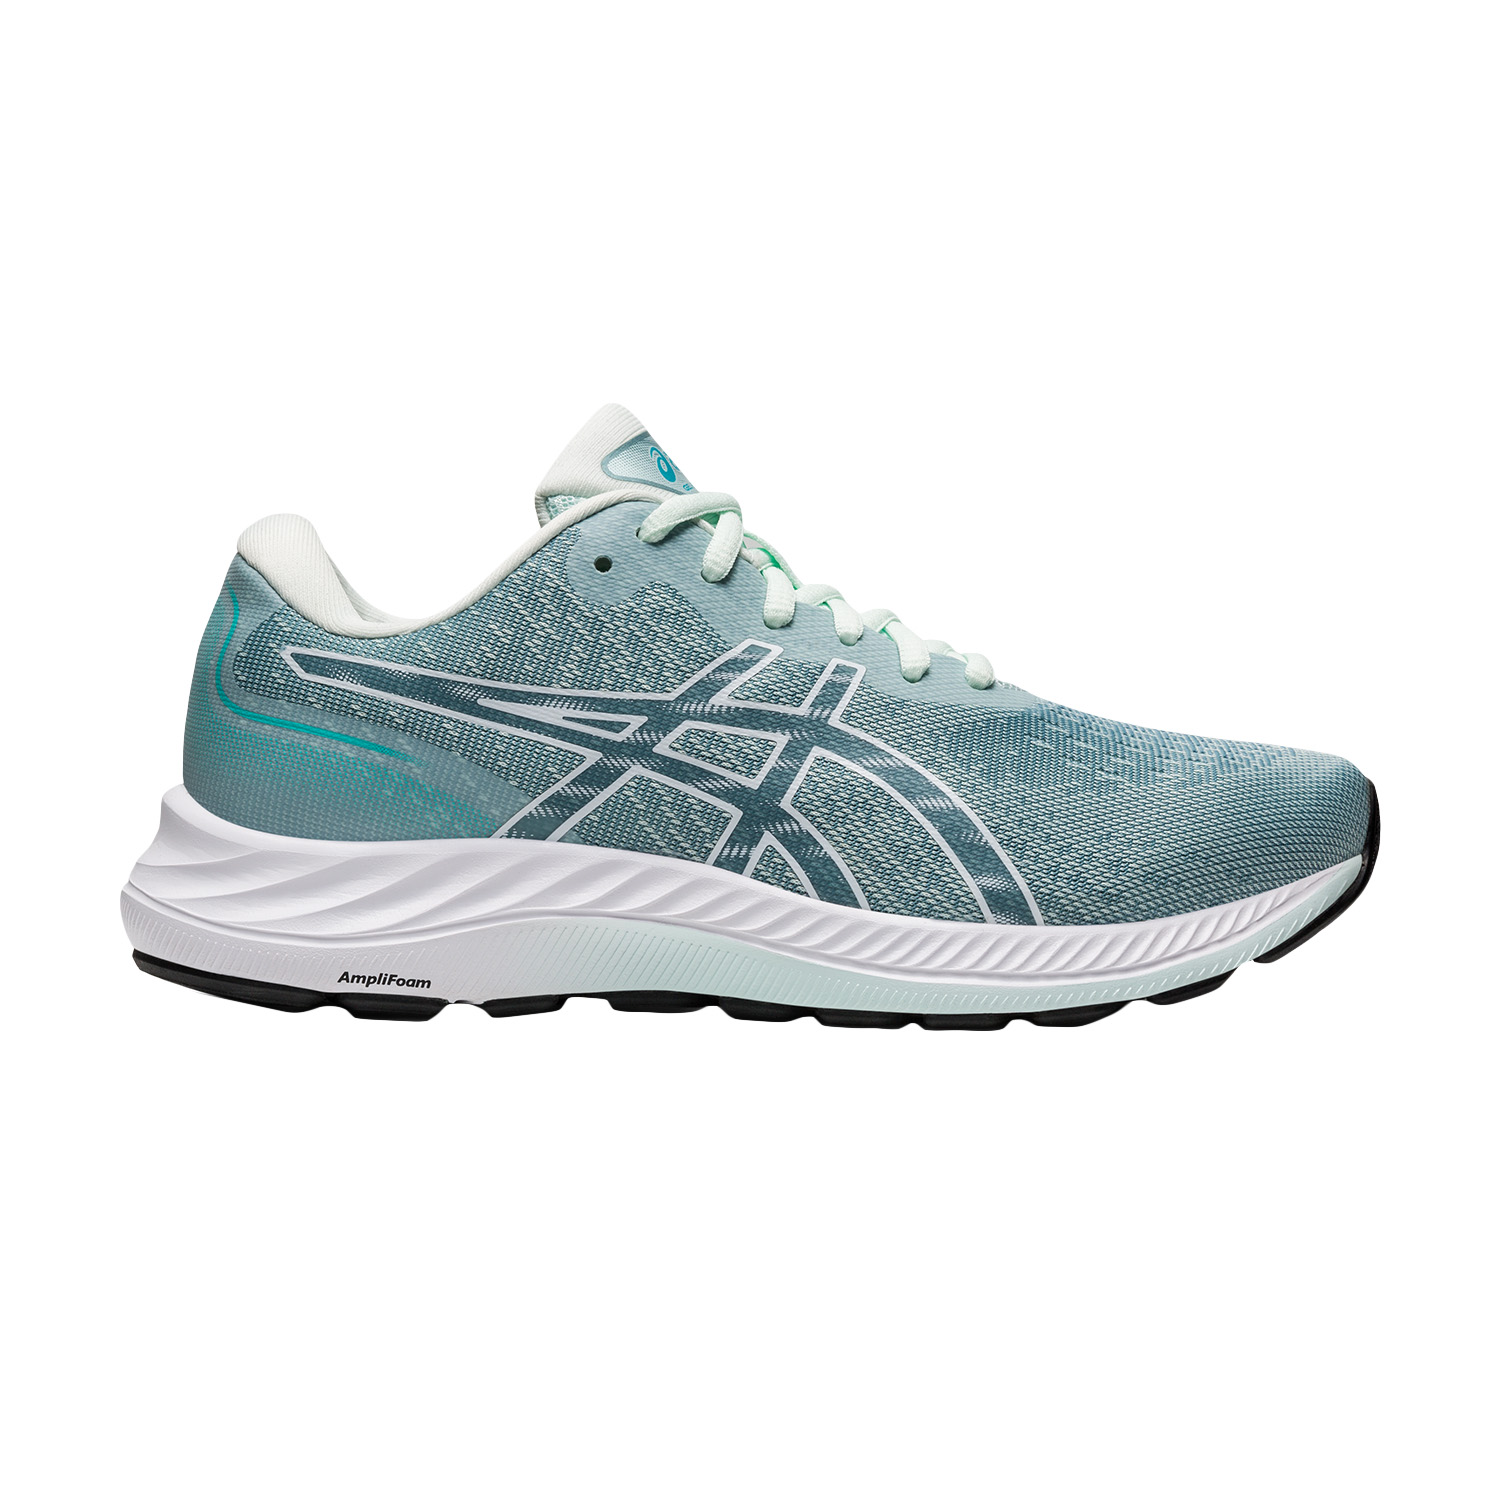 Asics Gel Excite 9 Women's Running Shoes - Soothing Sea/White